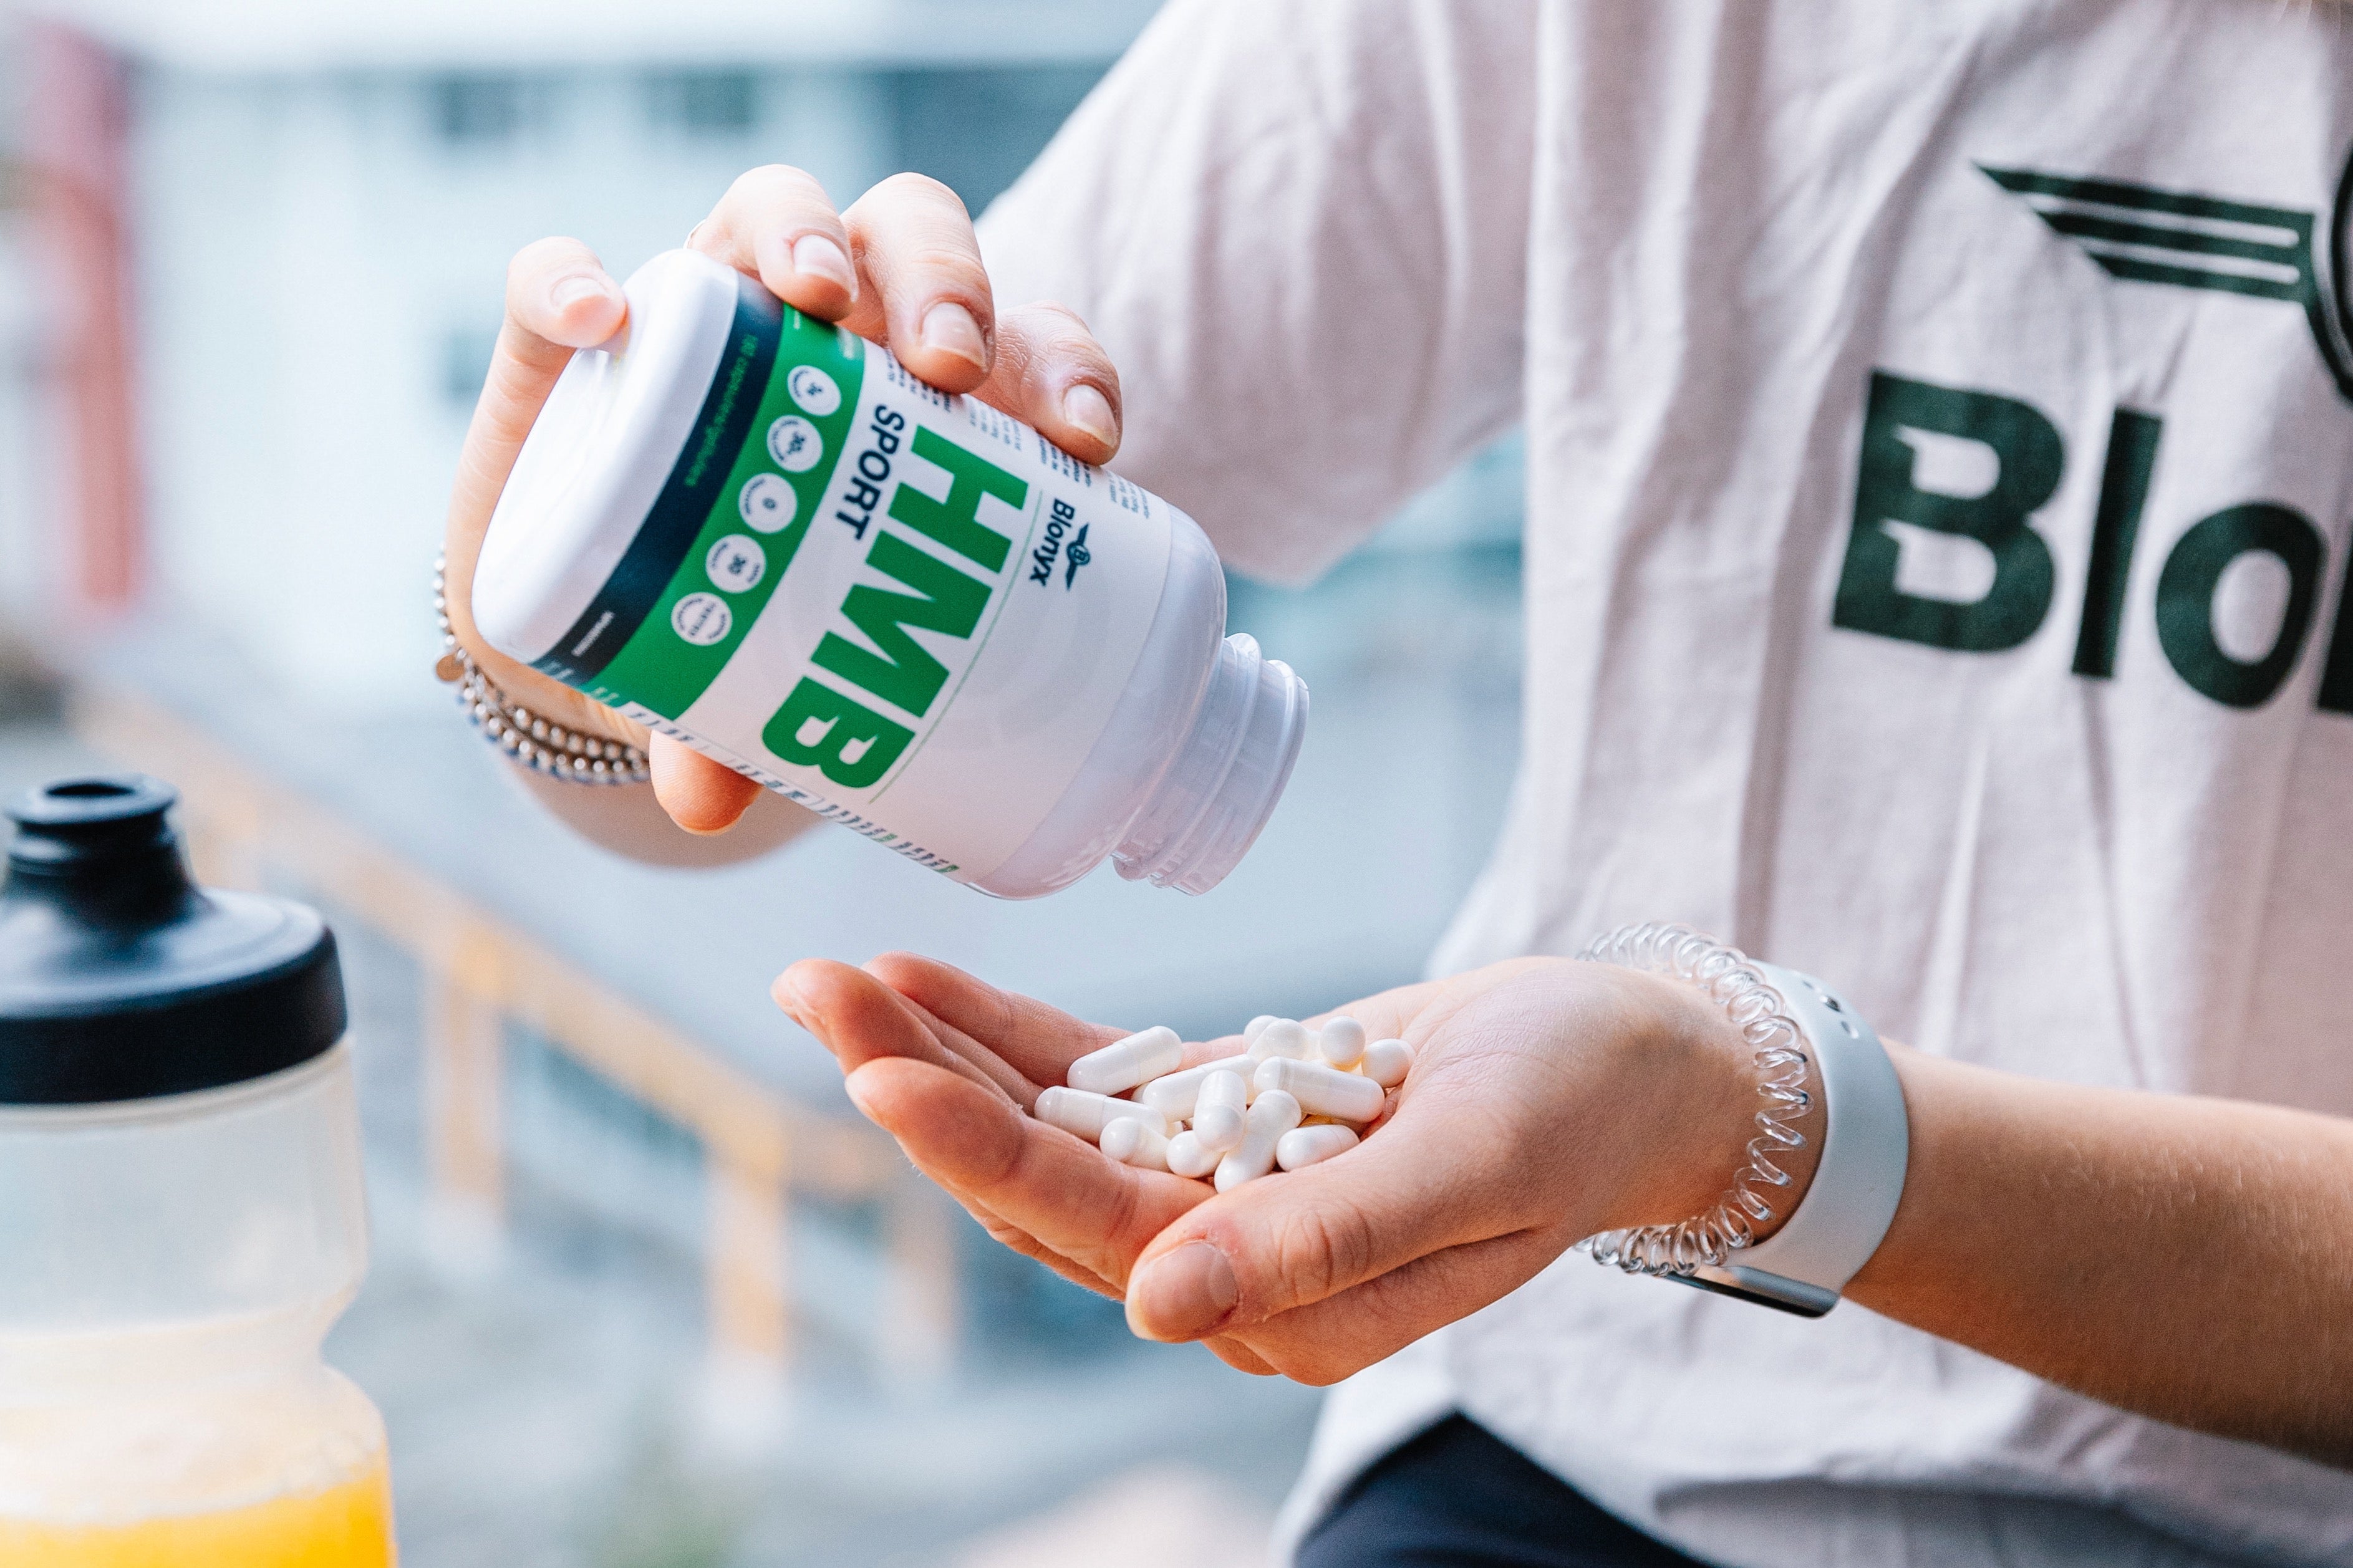 Person pouring HBM Sport capsules into their hand